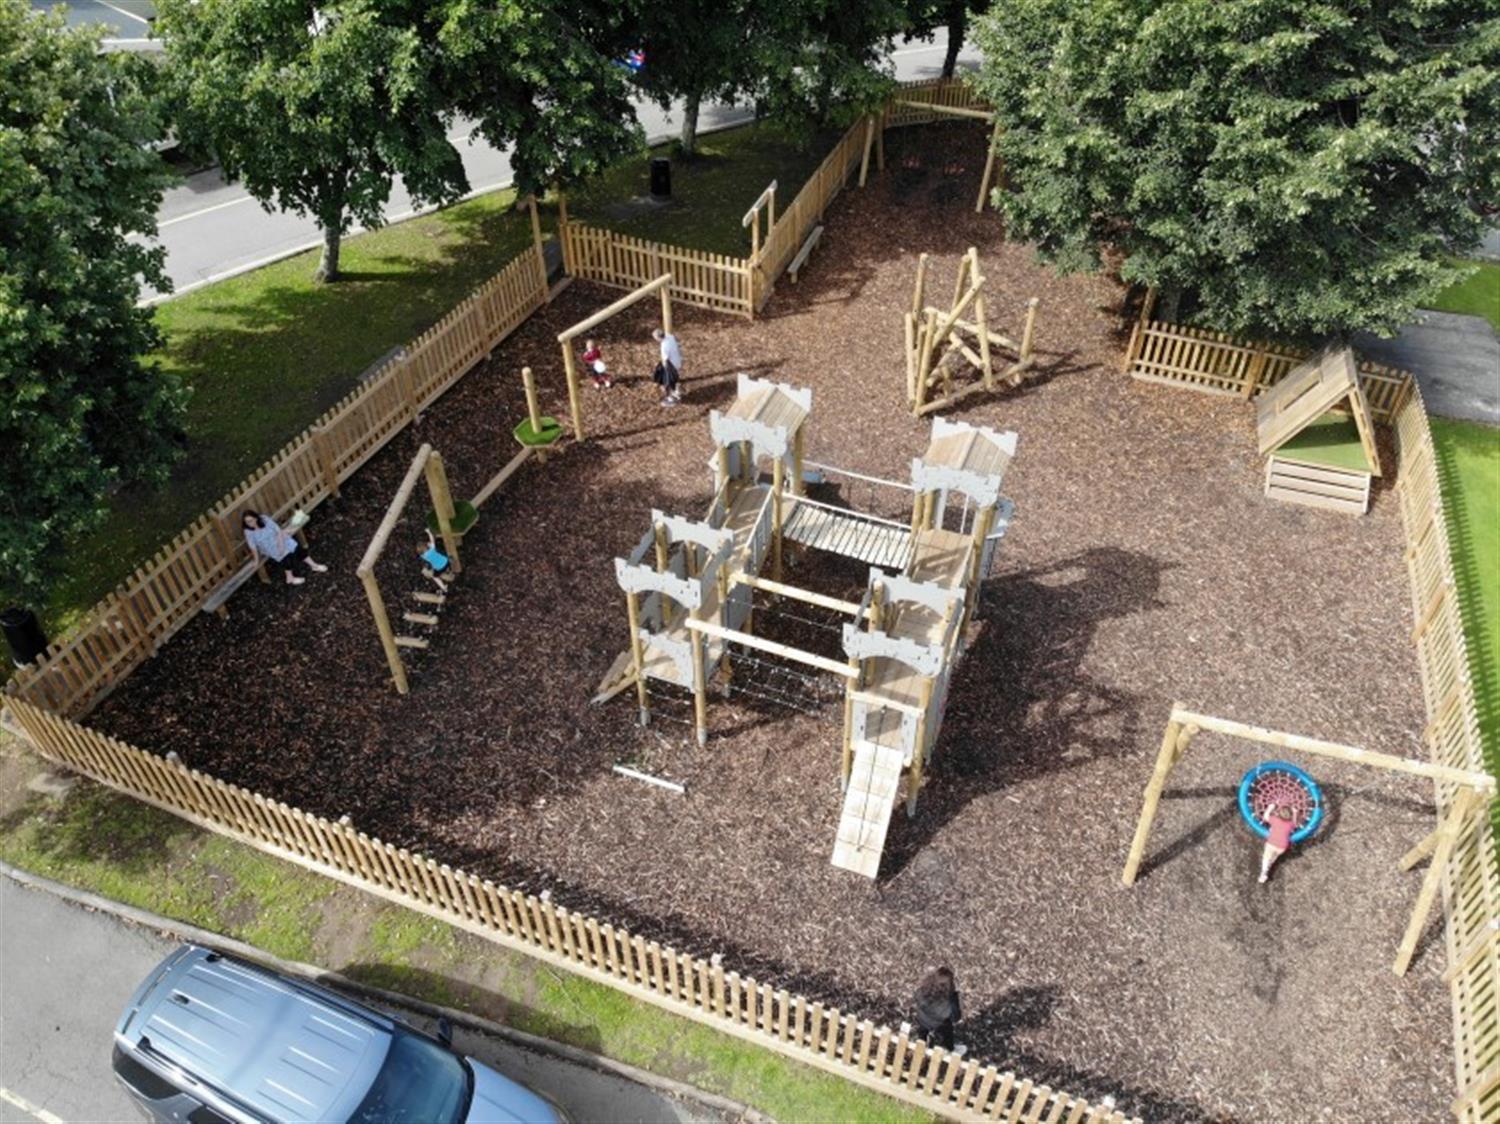 A picture taken from a drone showing a birds-eye view of the outdoor play area that Pentagon Play made for Brynteg Holiday Park